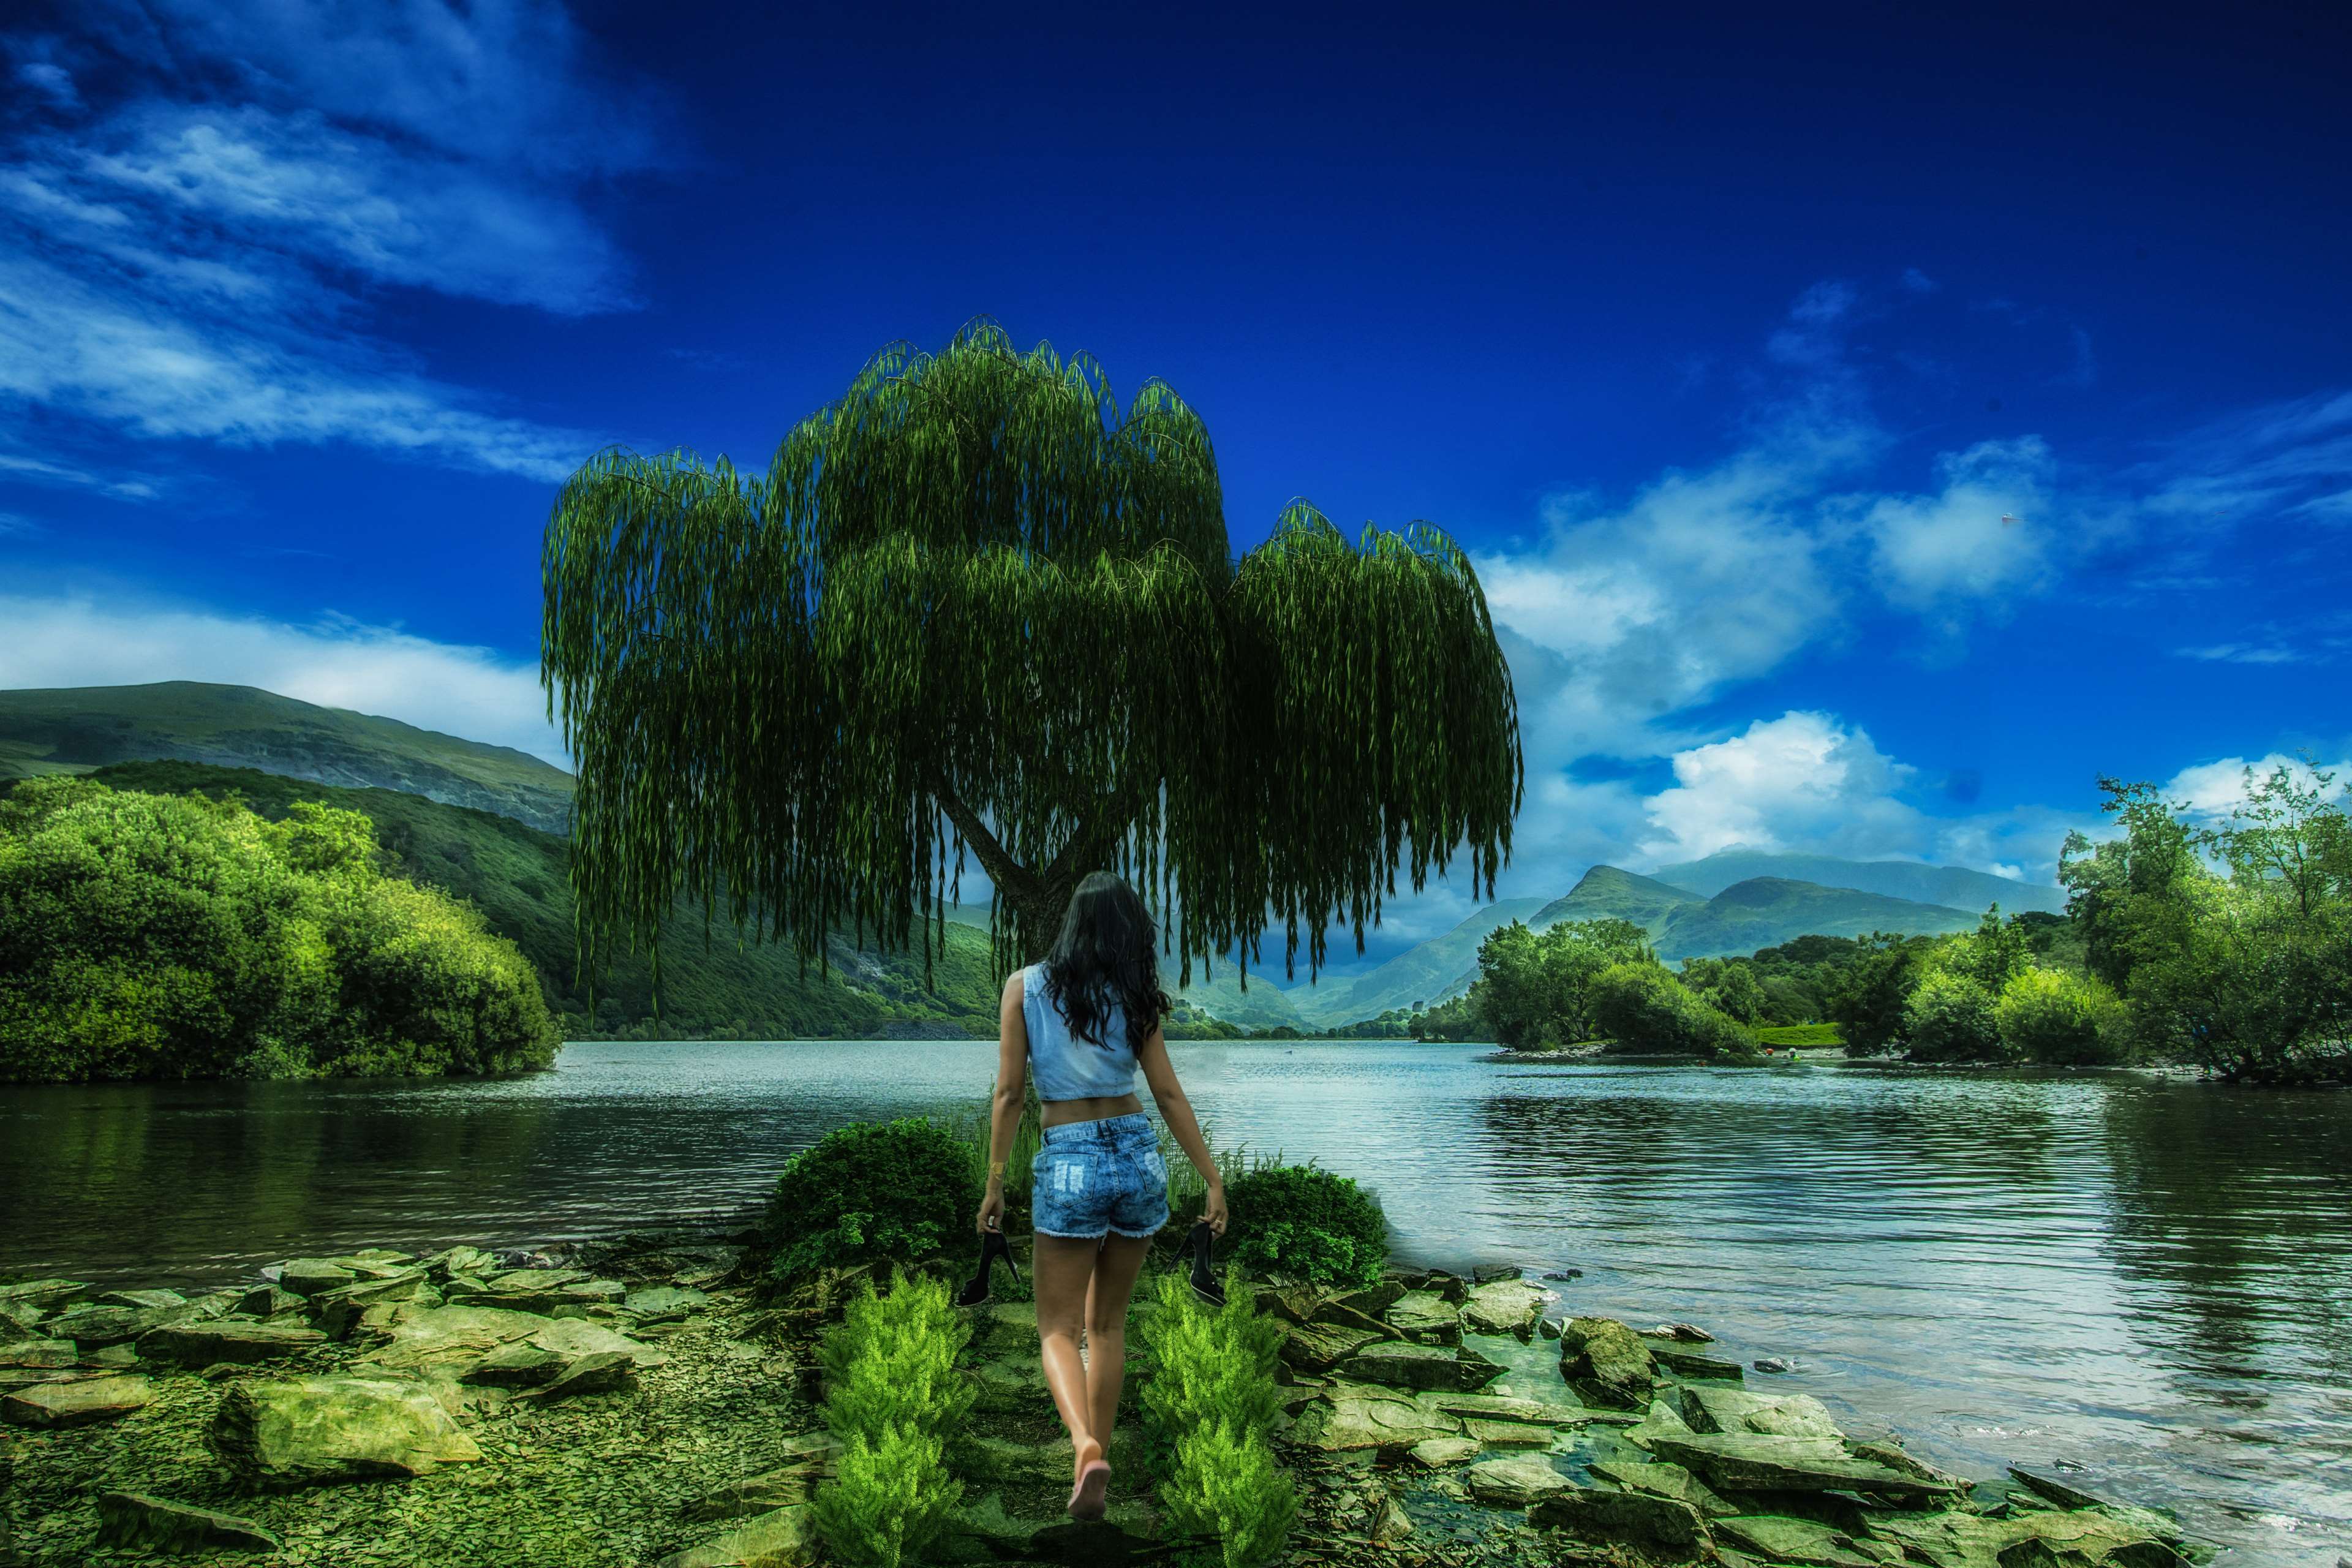 background, beautiful, cloud, clouds, daylight, girl, grass, green, lake, landscape, mountains, nature, outdoors, park, pool, reflection, river, rocks, scenic, sky, summer, tree, trees, wallpaper, water, wood 4k Gallery HD Wallpaper